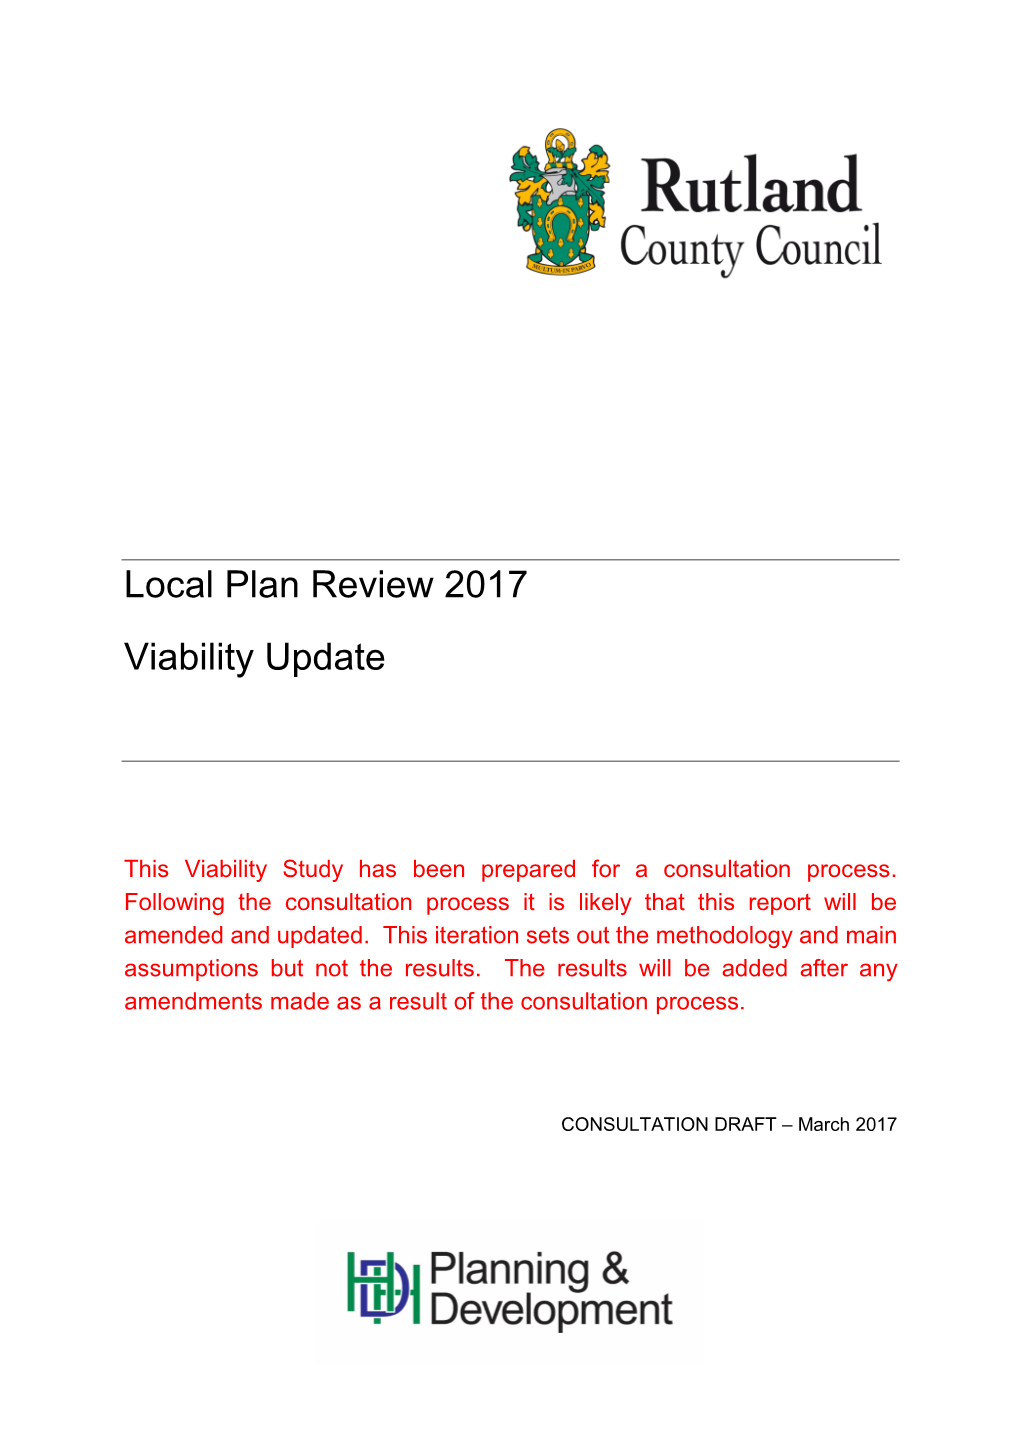 Local Plan Review 2017 Viability Update